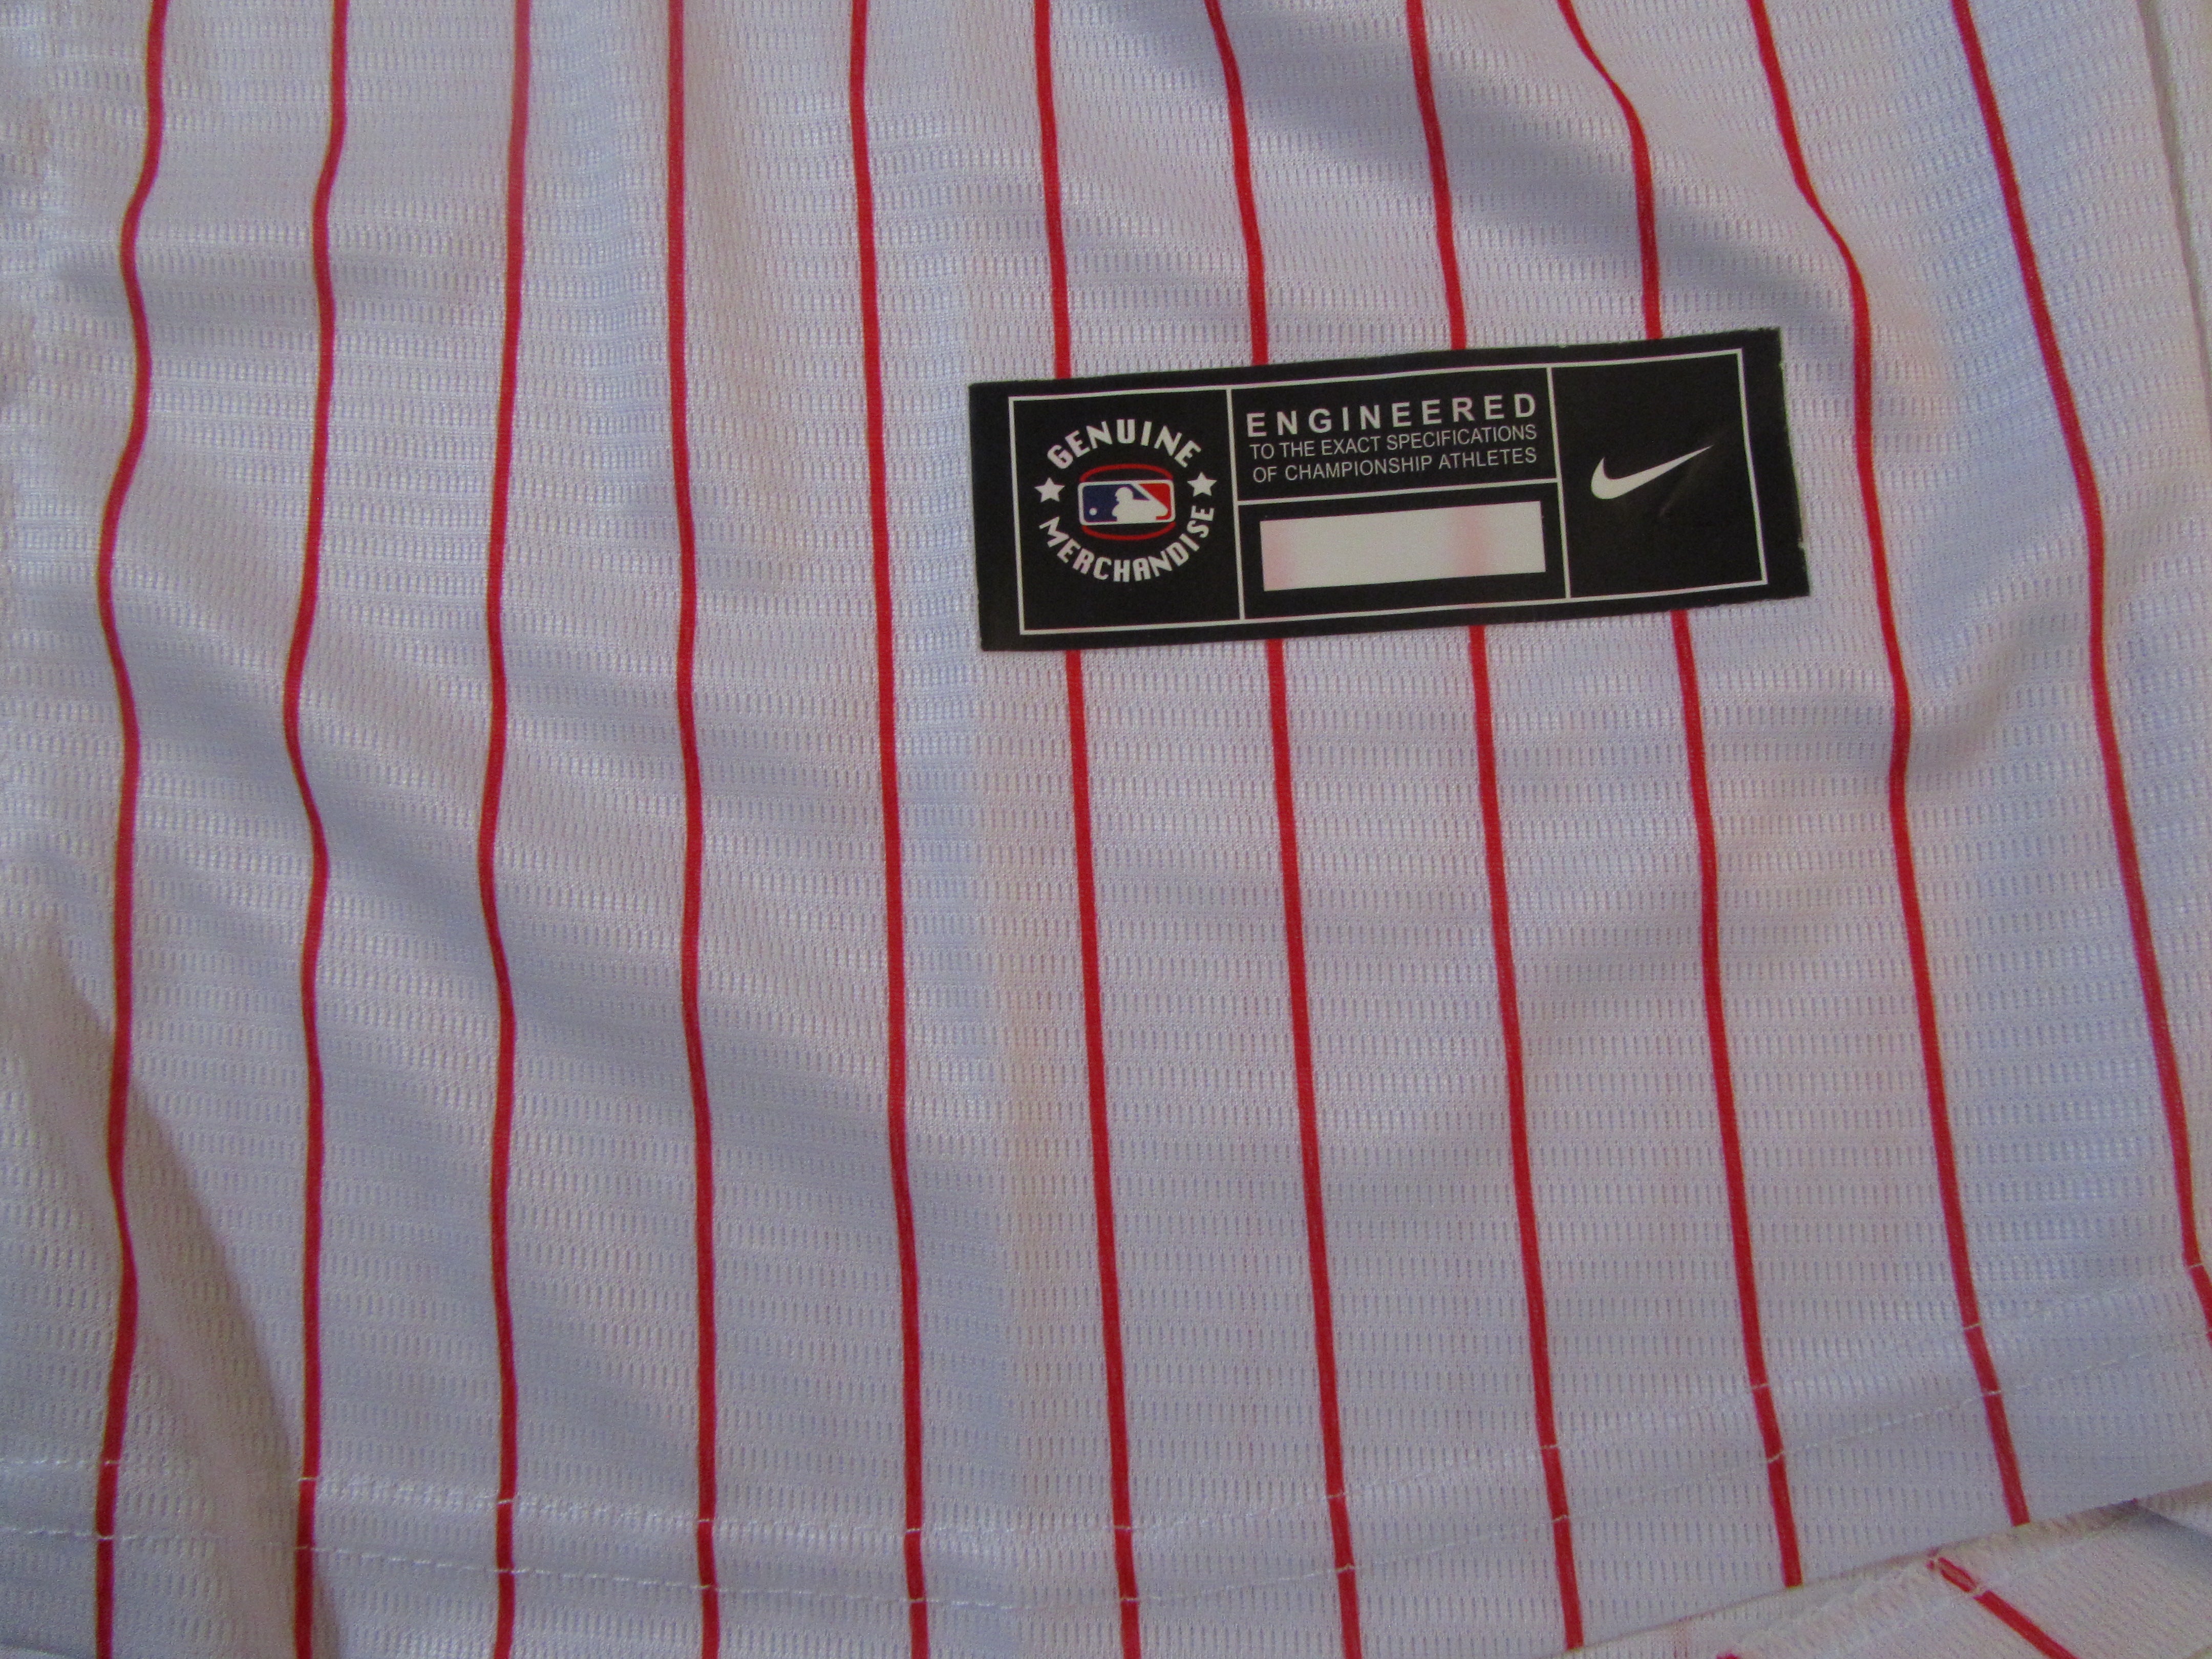 USED PHILLIES White RED PINSTRIPE BUTTON UP Men's BASEBALL JERSEY Medium #3  no tags